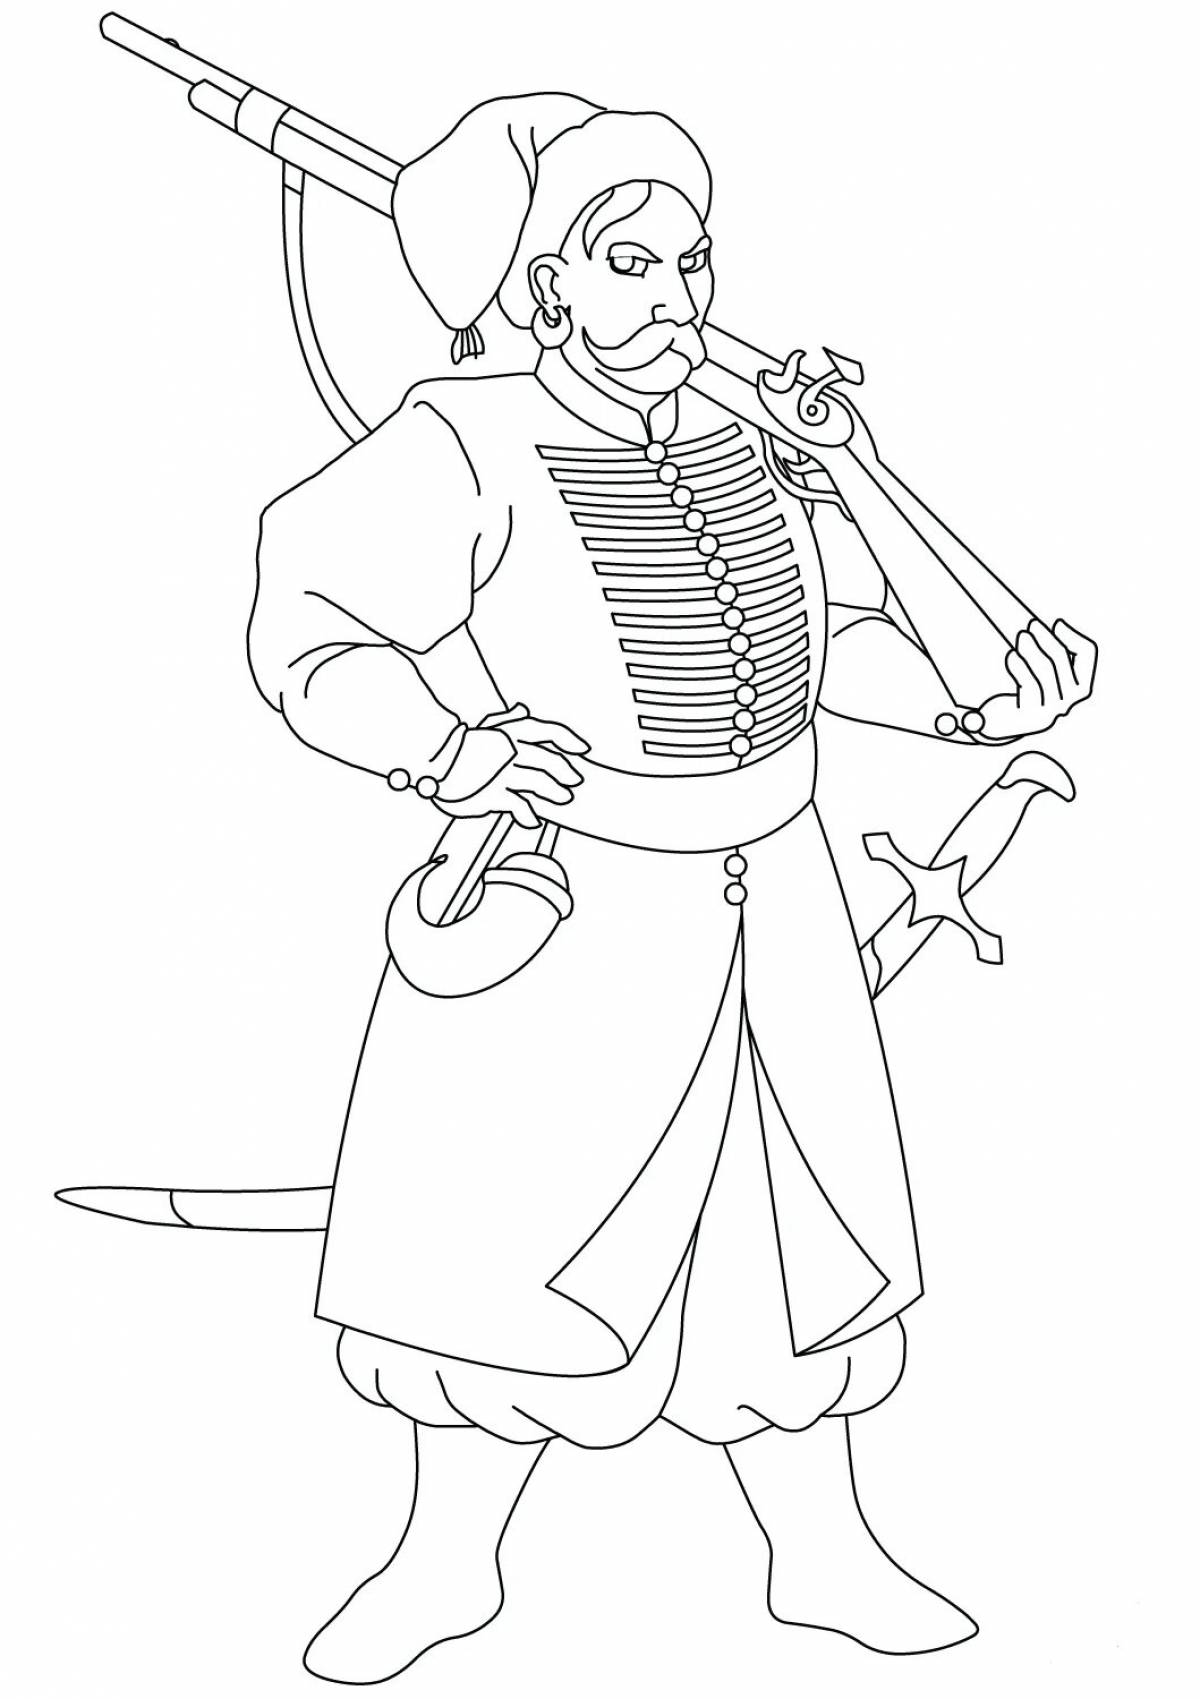 Coloring page sparkling Cossack costume